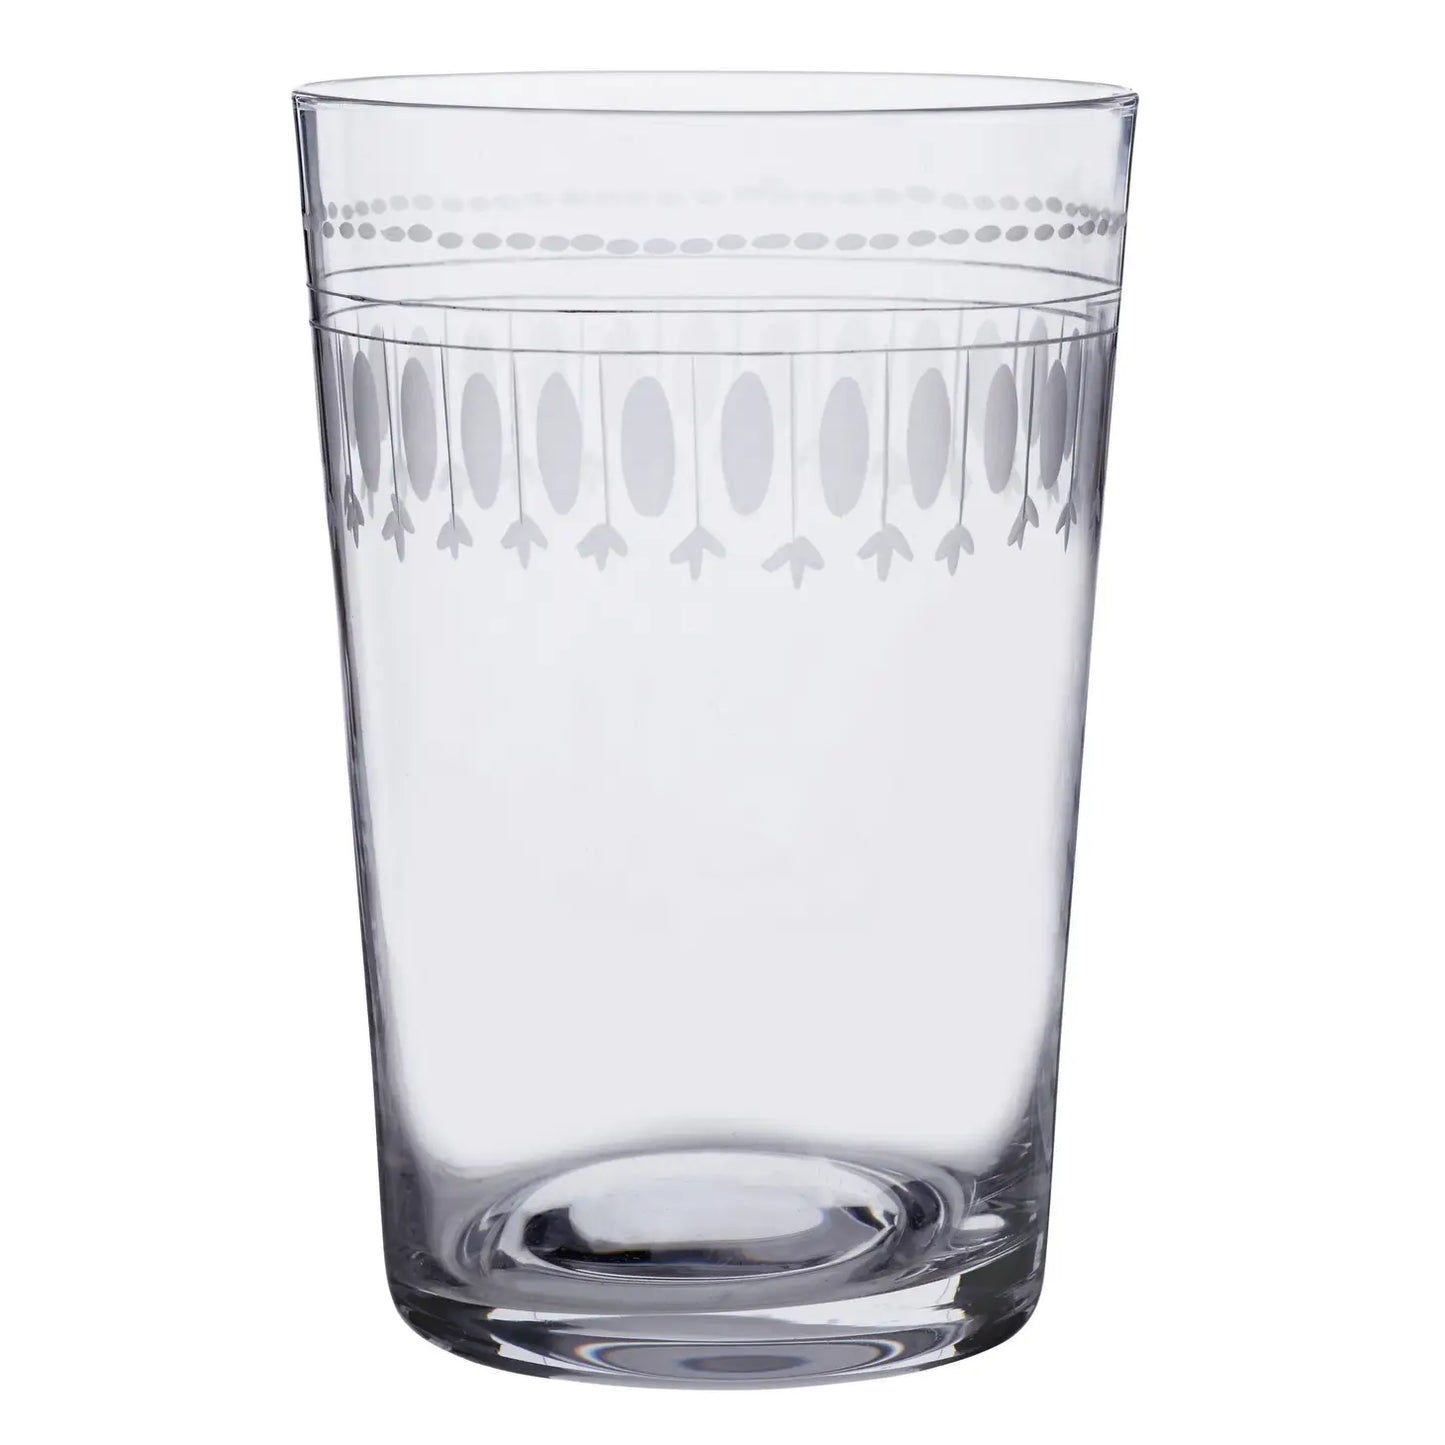 Crystal Tumblers with Ovals Design